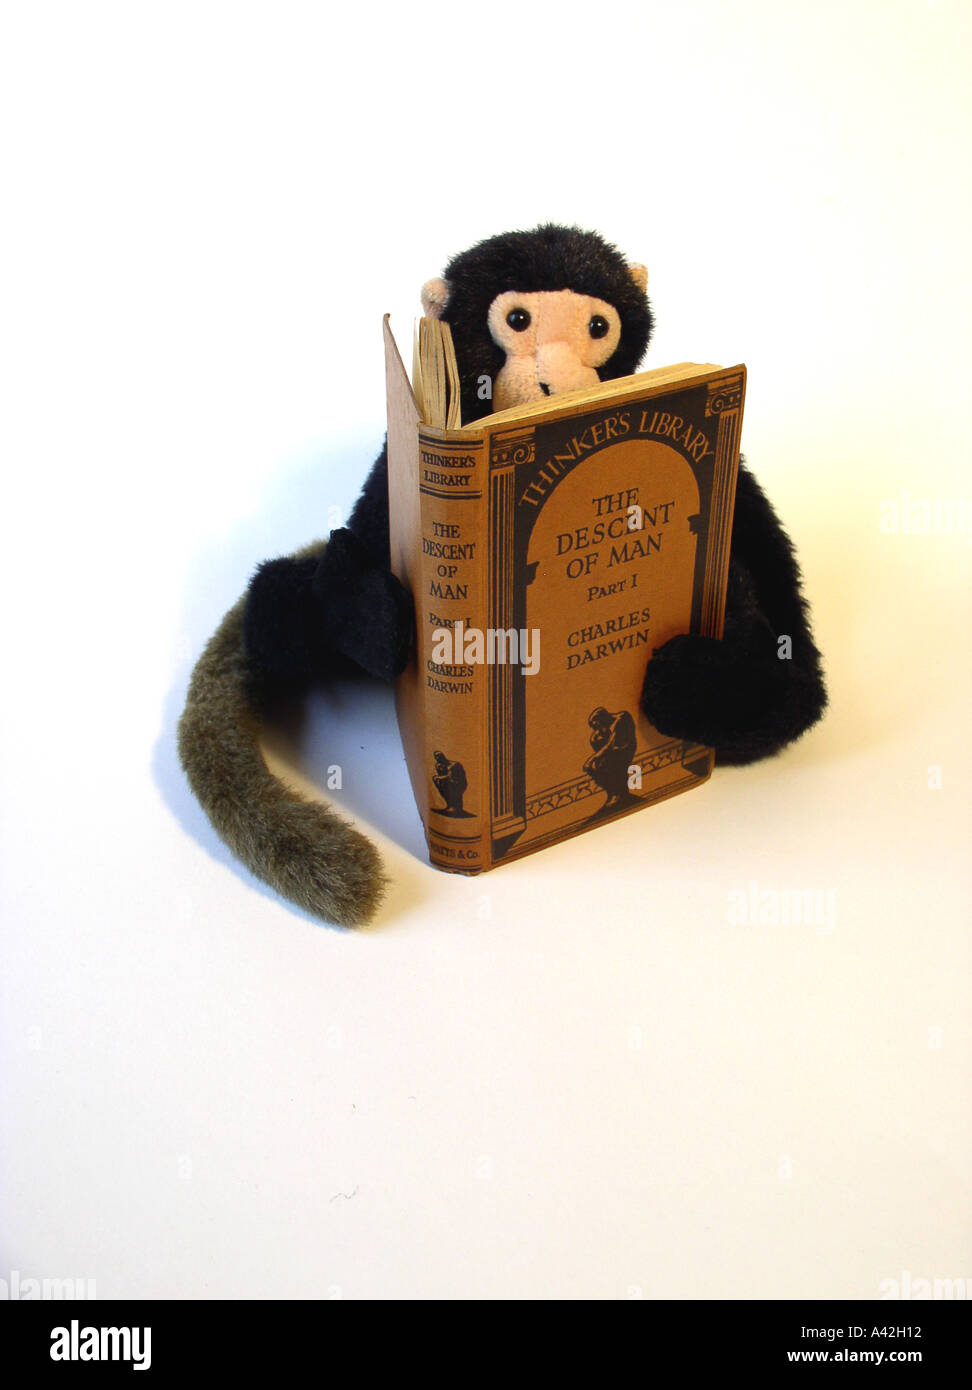 toy monkey reading The Descent of Man by Charles Darwin Thinkers Library edition Stock Photo